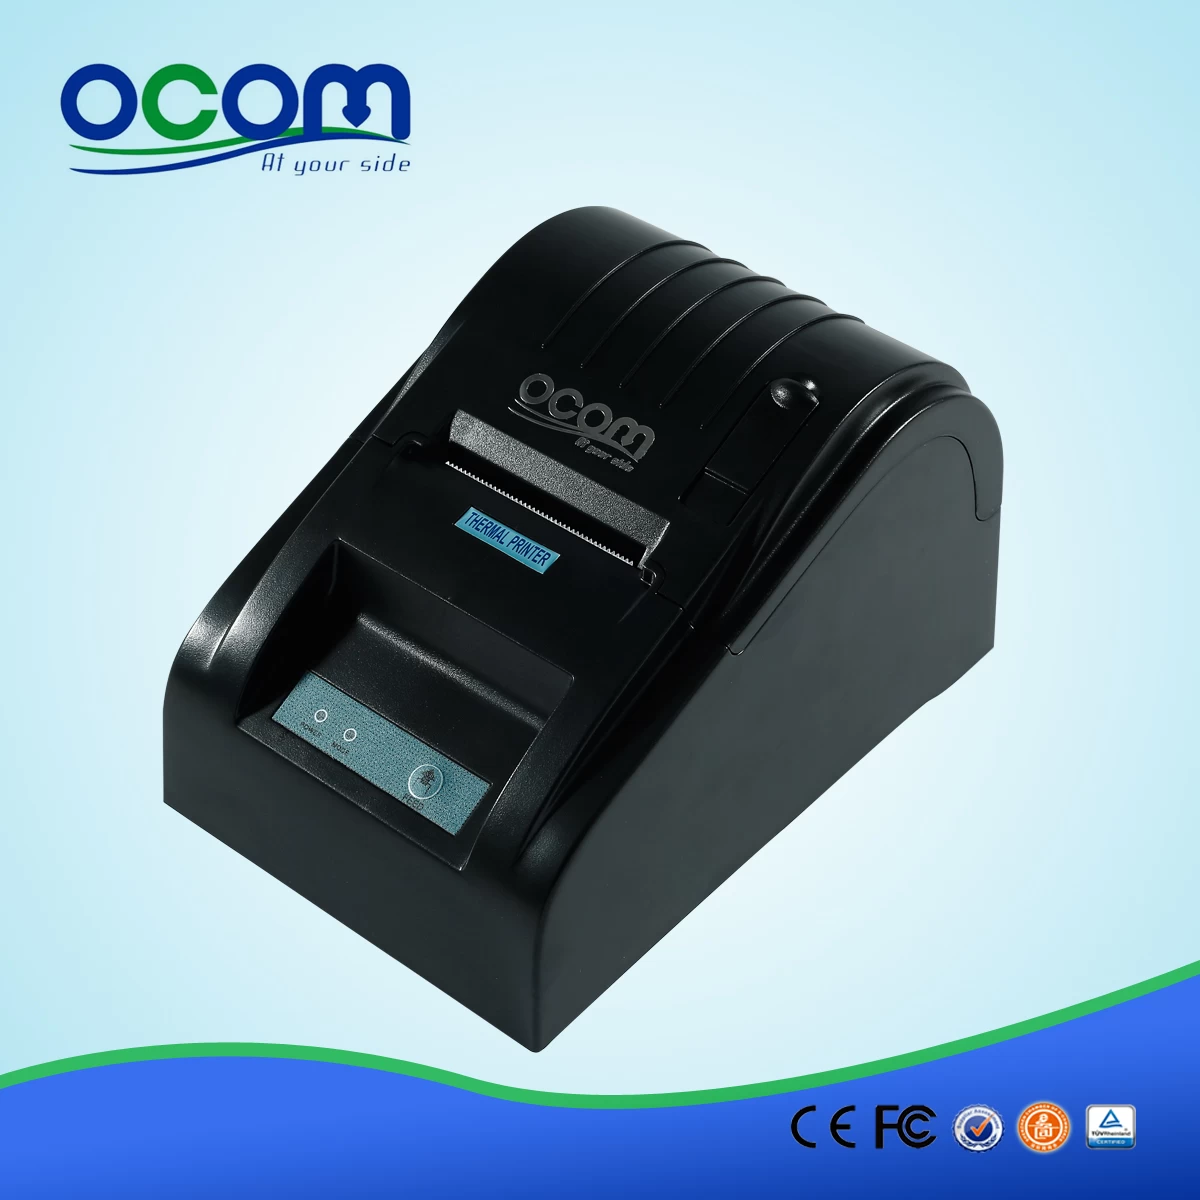 Android 58mm Thermal Bill Printer Supplier Made in China